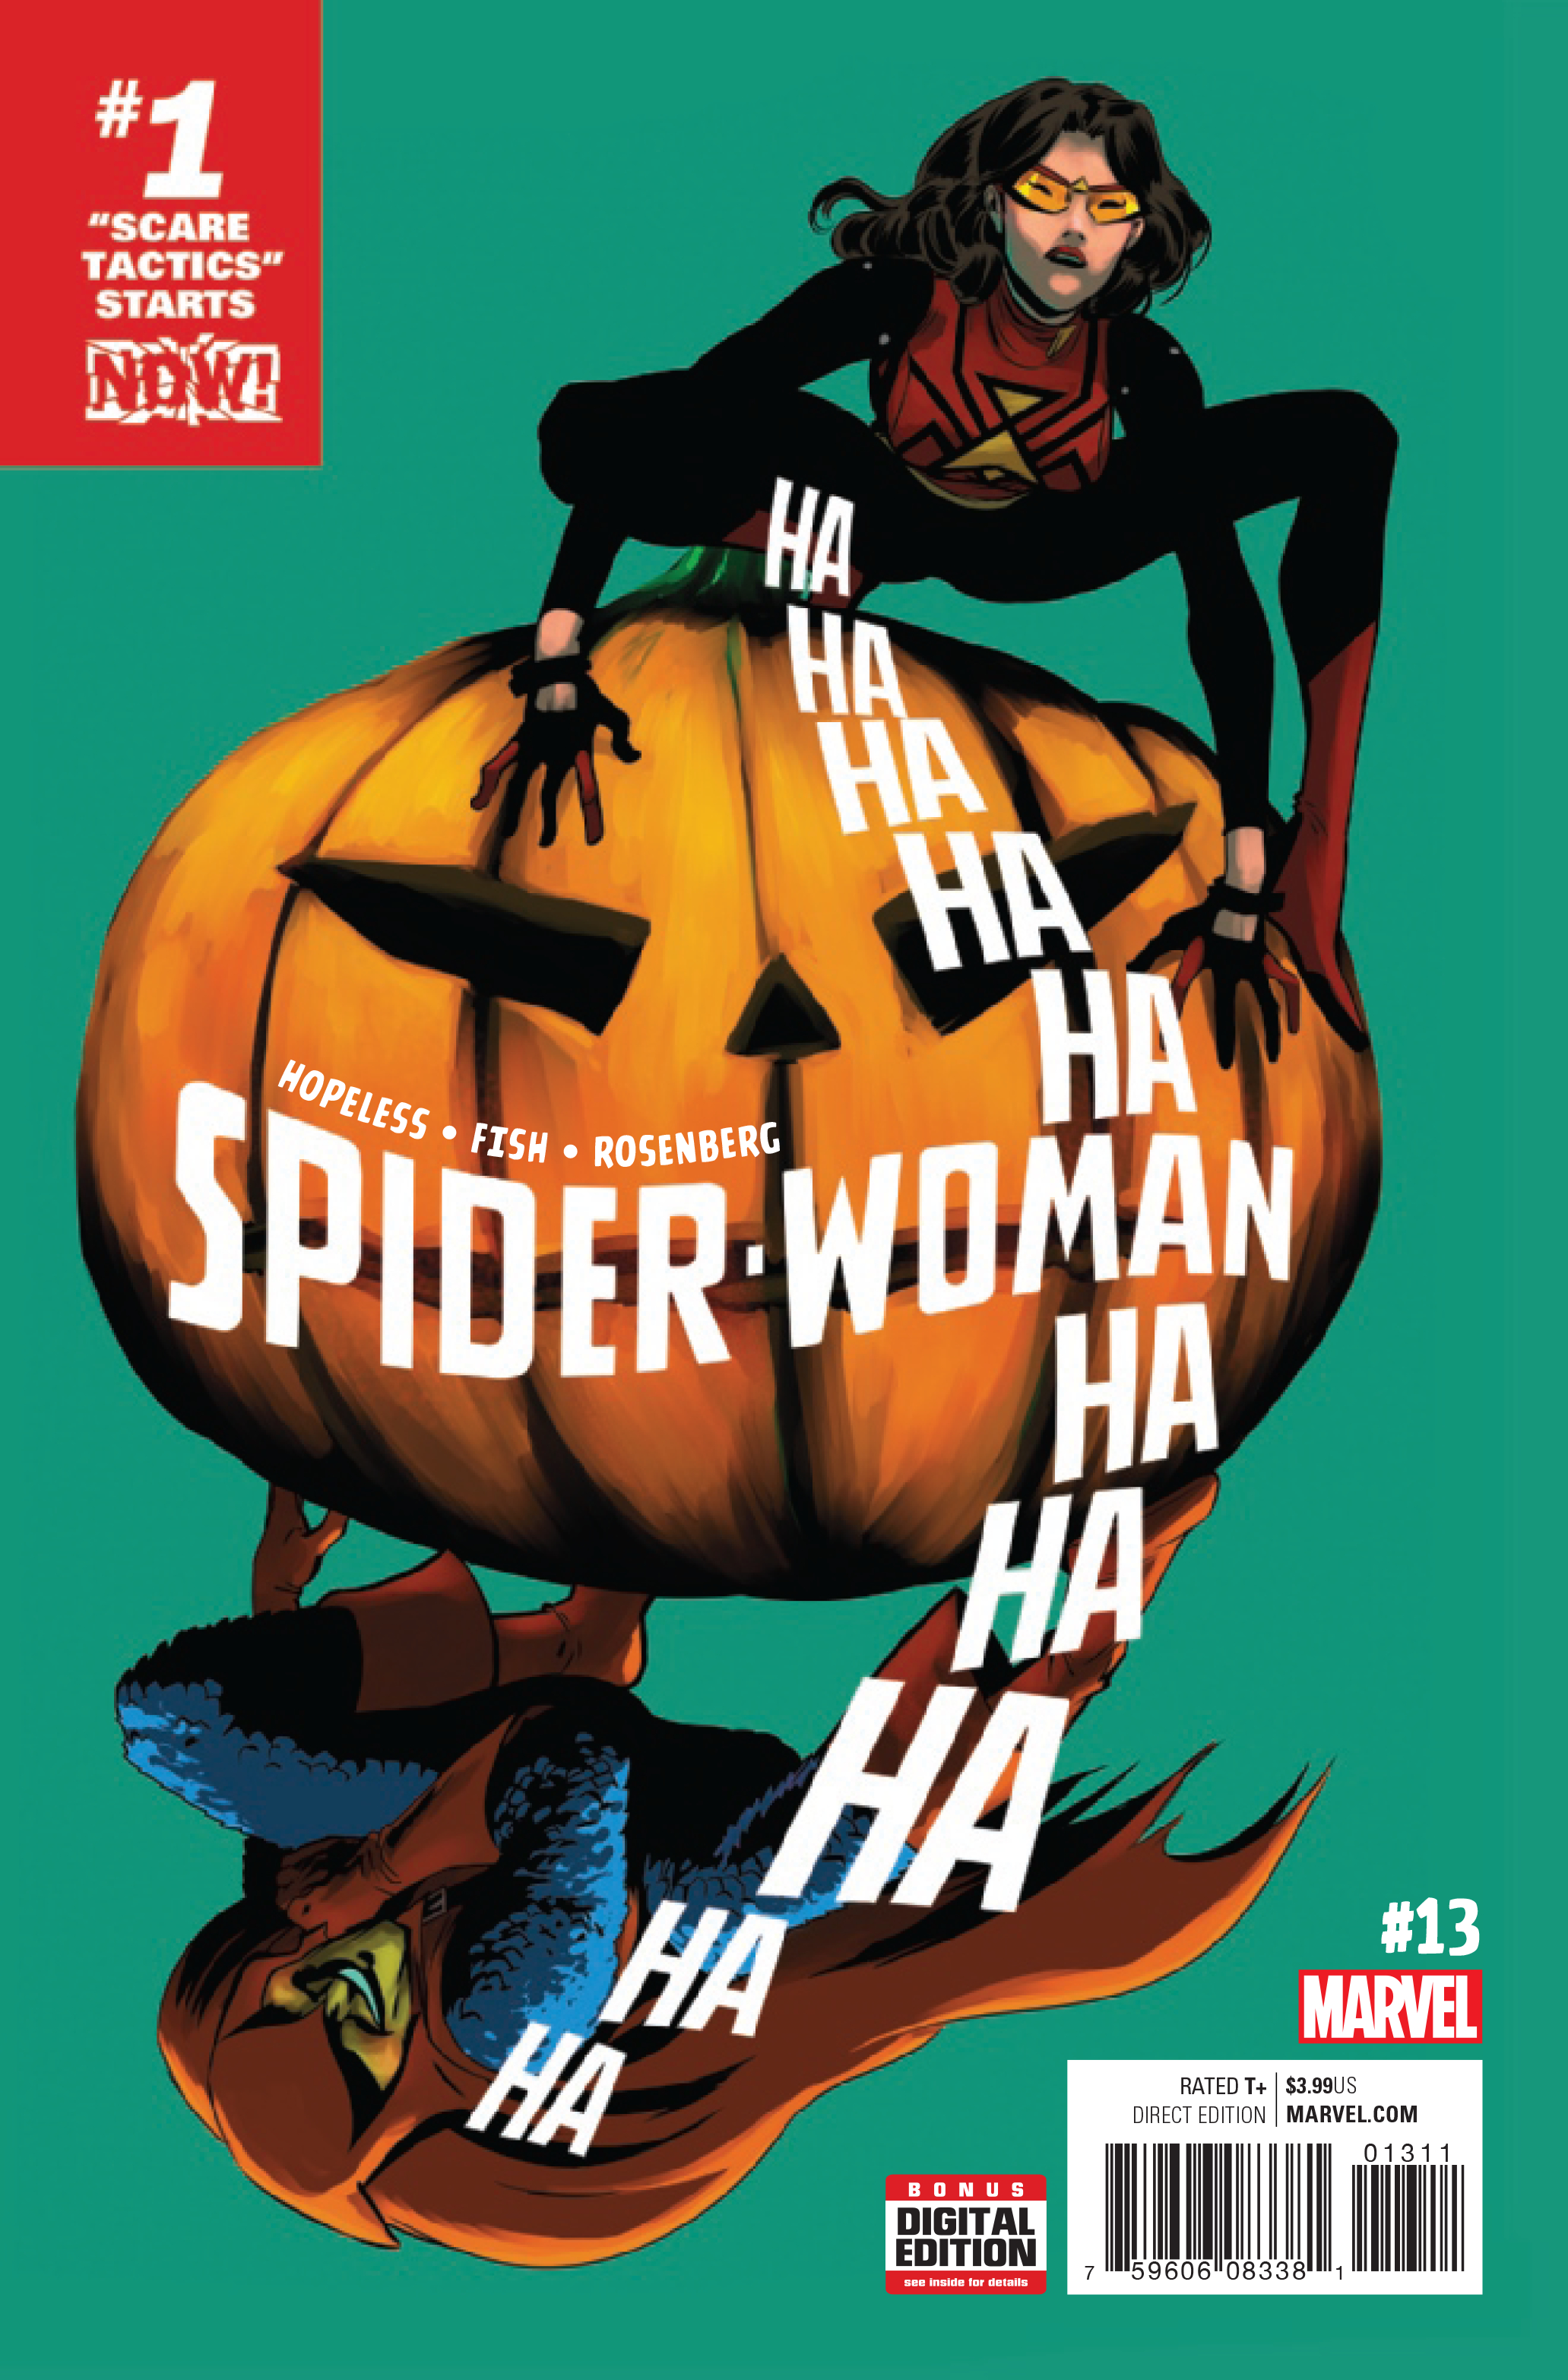 SPIDER-WOMAN #13 NOW